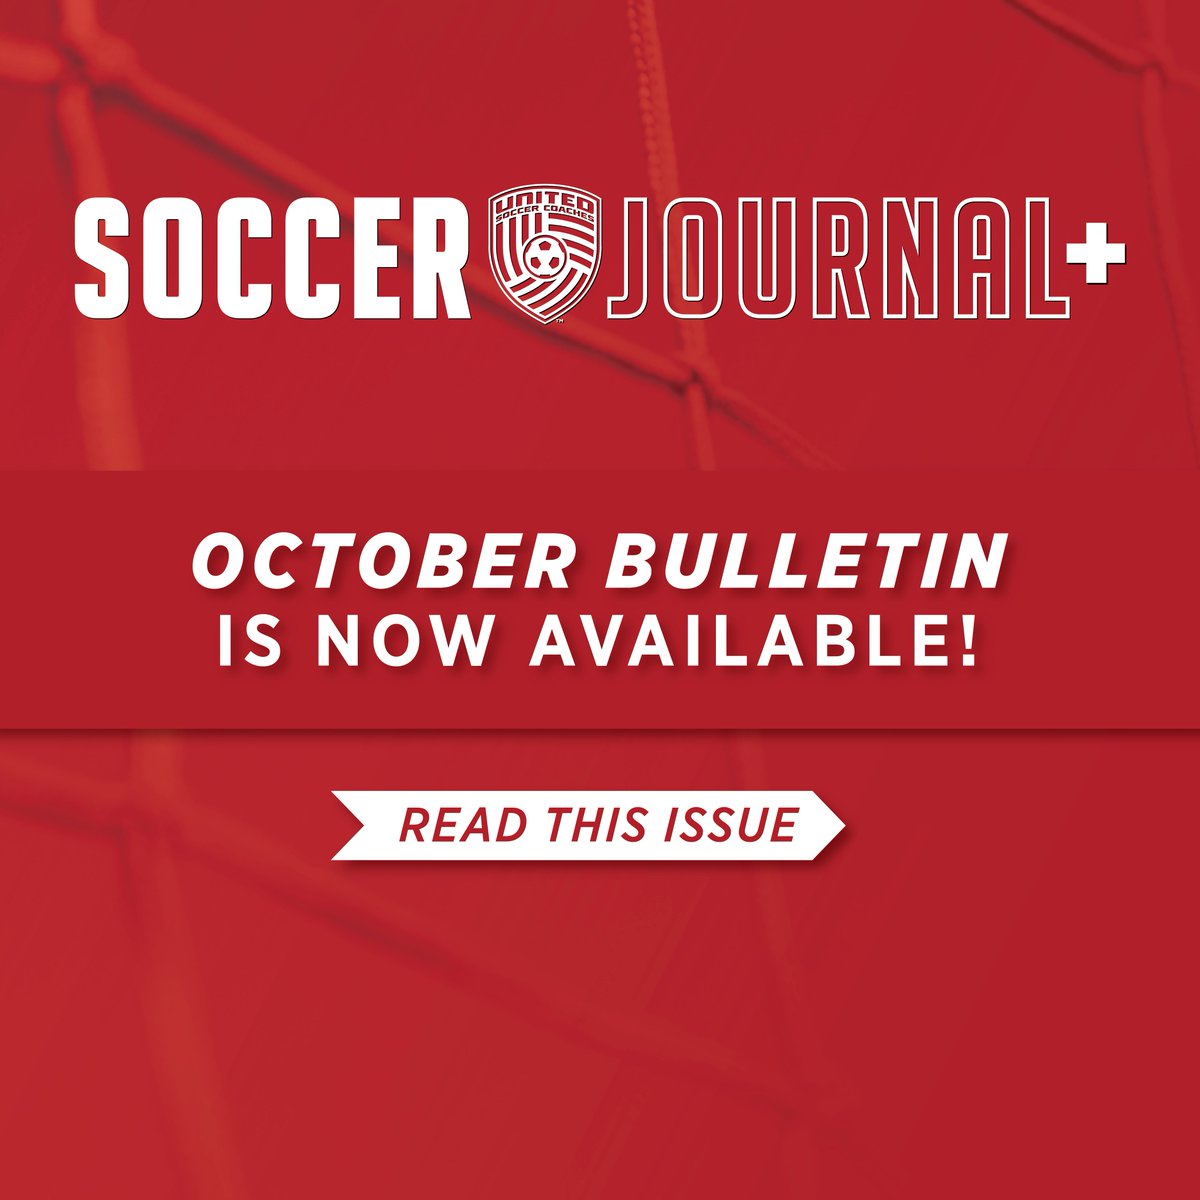 Listening to the same pre-game music, tapping the goalpost for good luck...the superstitions are endless! In October's SJ+ Bulletin, you'll find a Best of SJ article from 1994 all about superstitions. Celebrate Friday the 13th by giving it a read today: unitedsoccercoaches.org/soccer-journal…